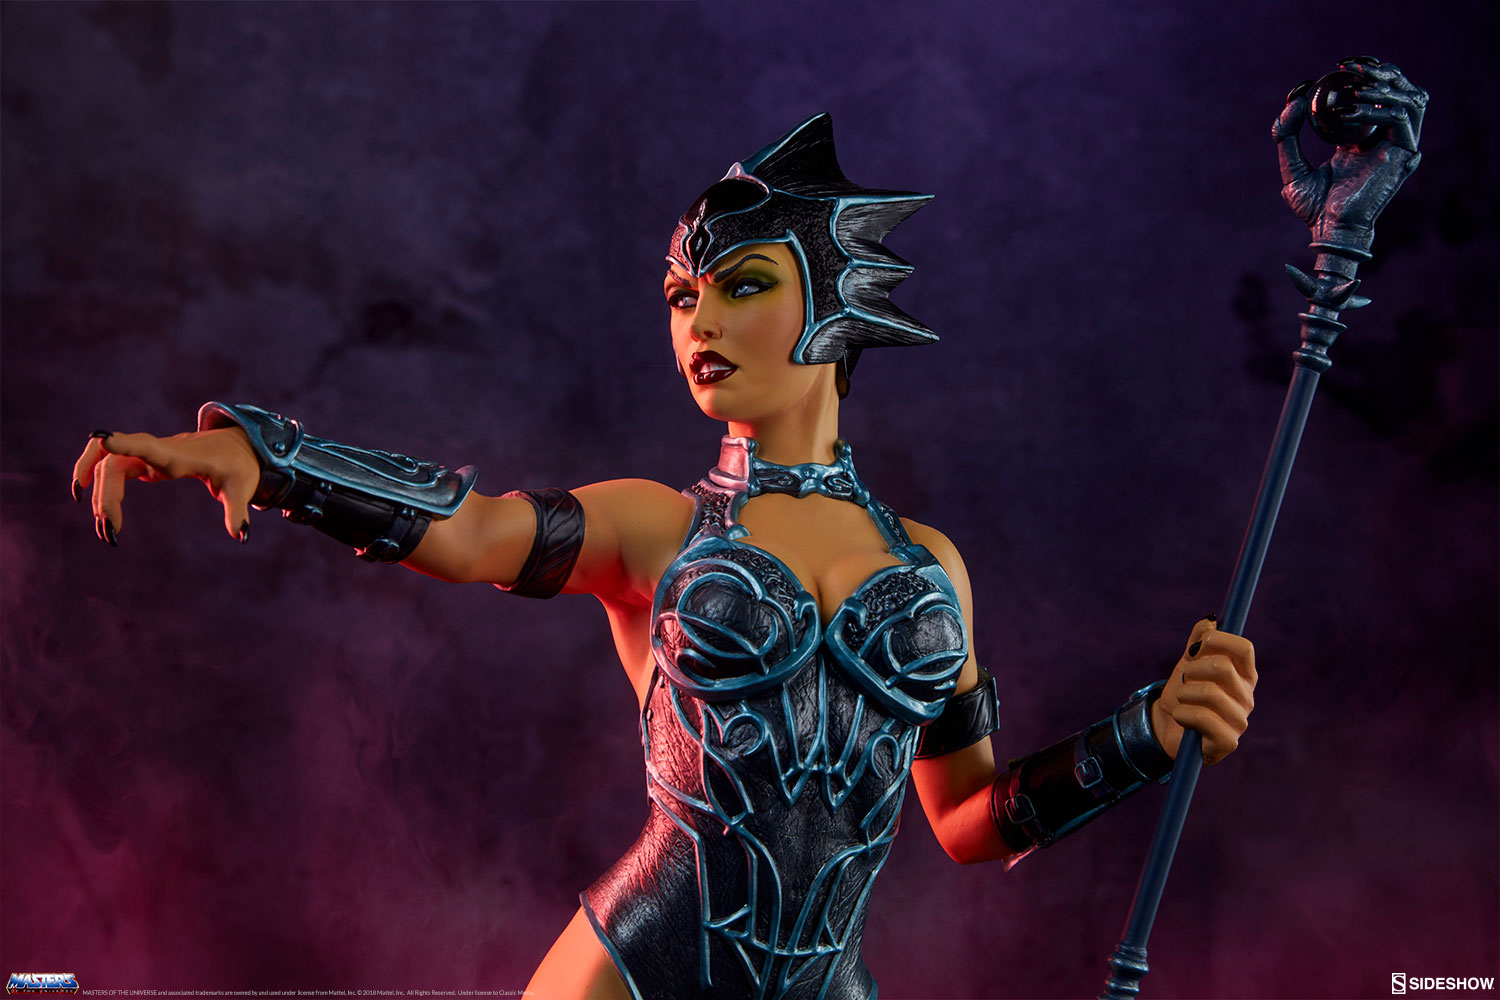 masters-of-the-universe-evil-lyn-classic-statue-sideshow-2004613-02.jpg